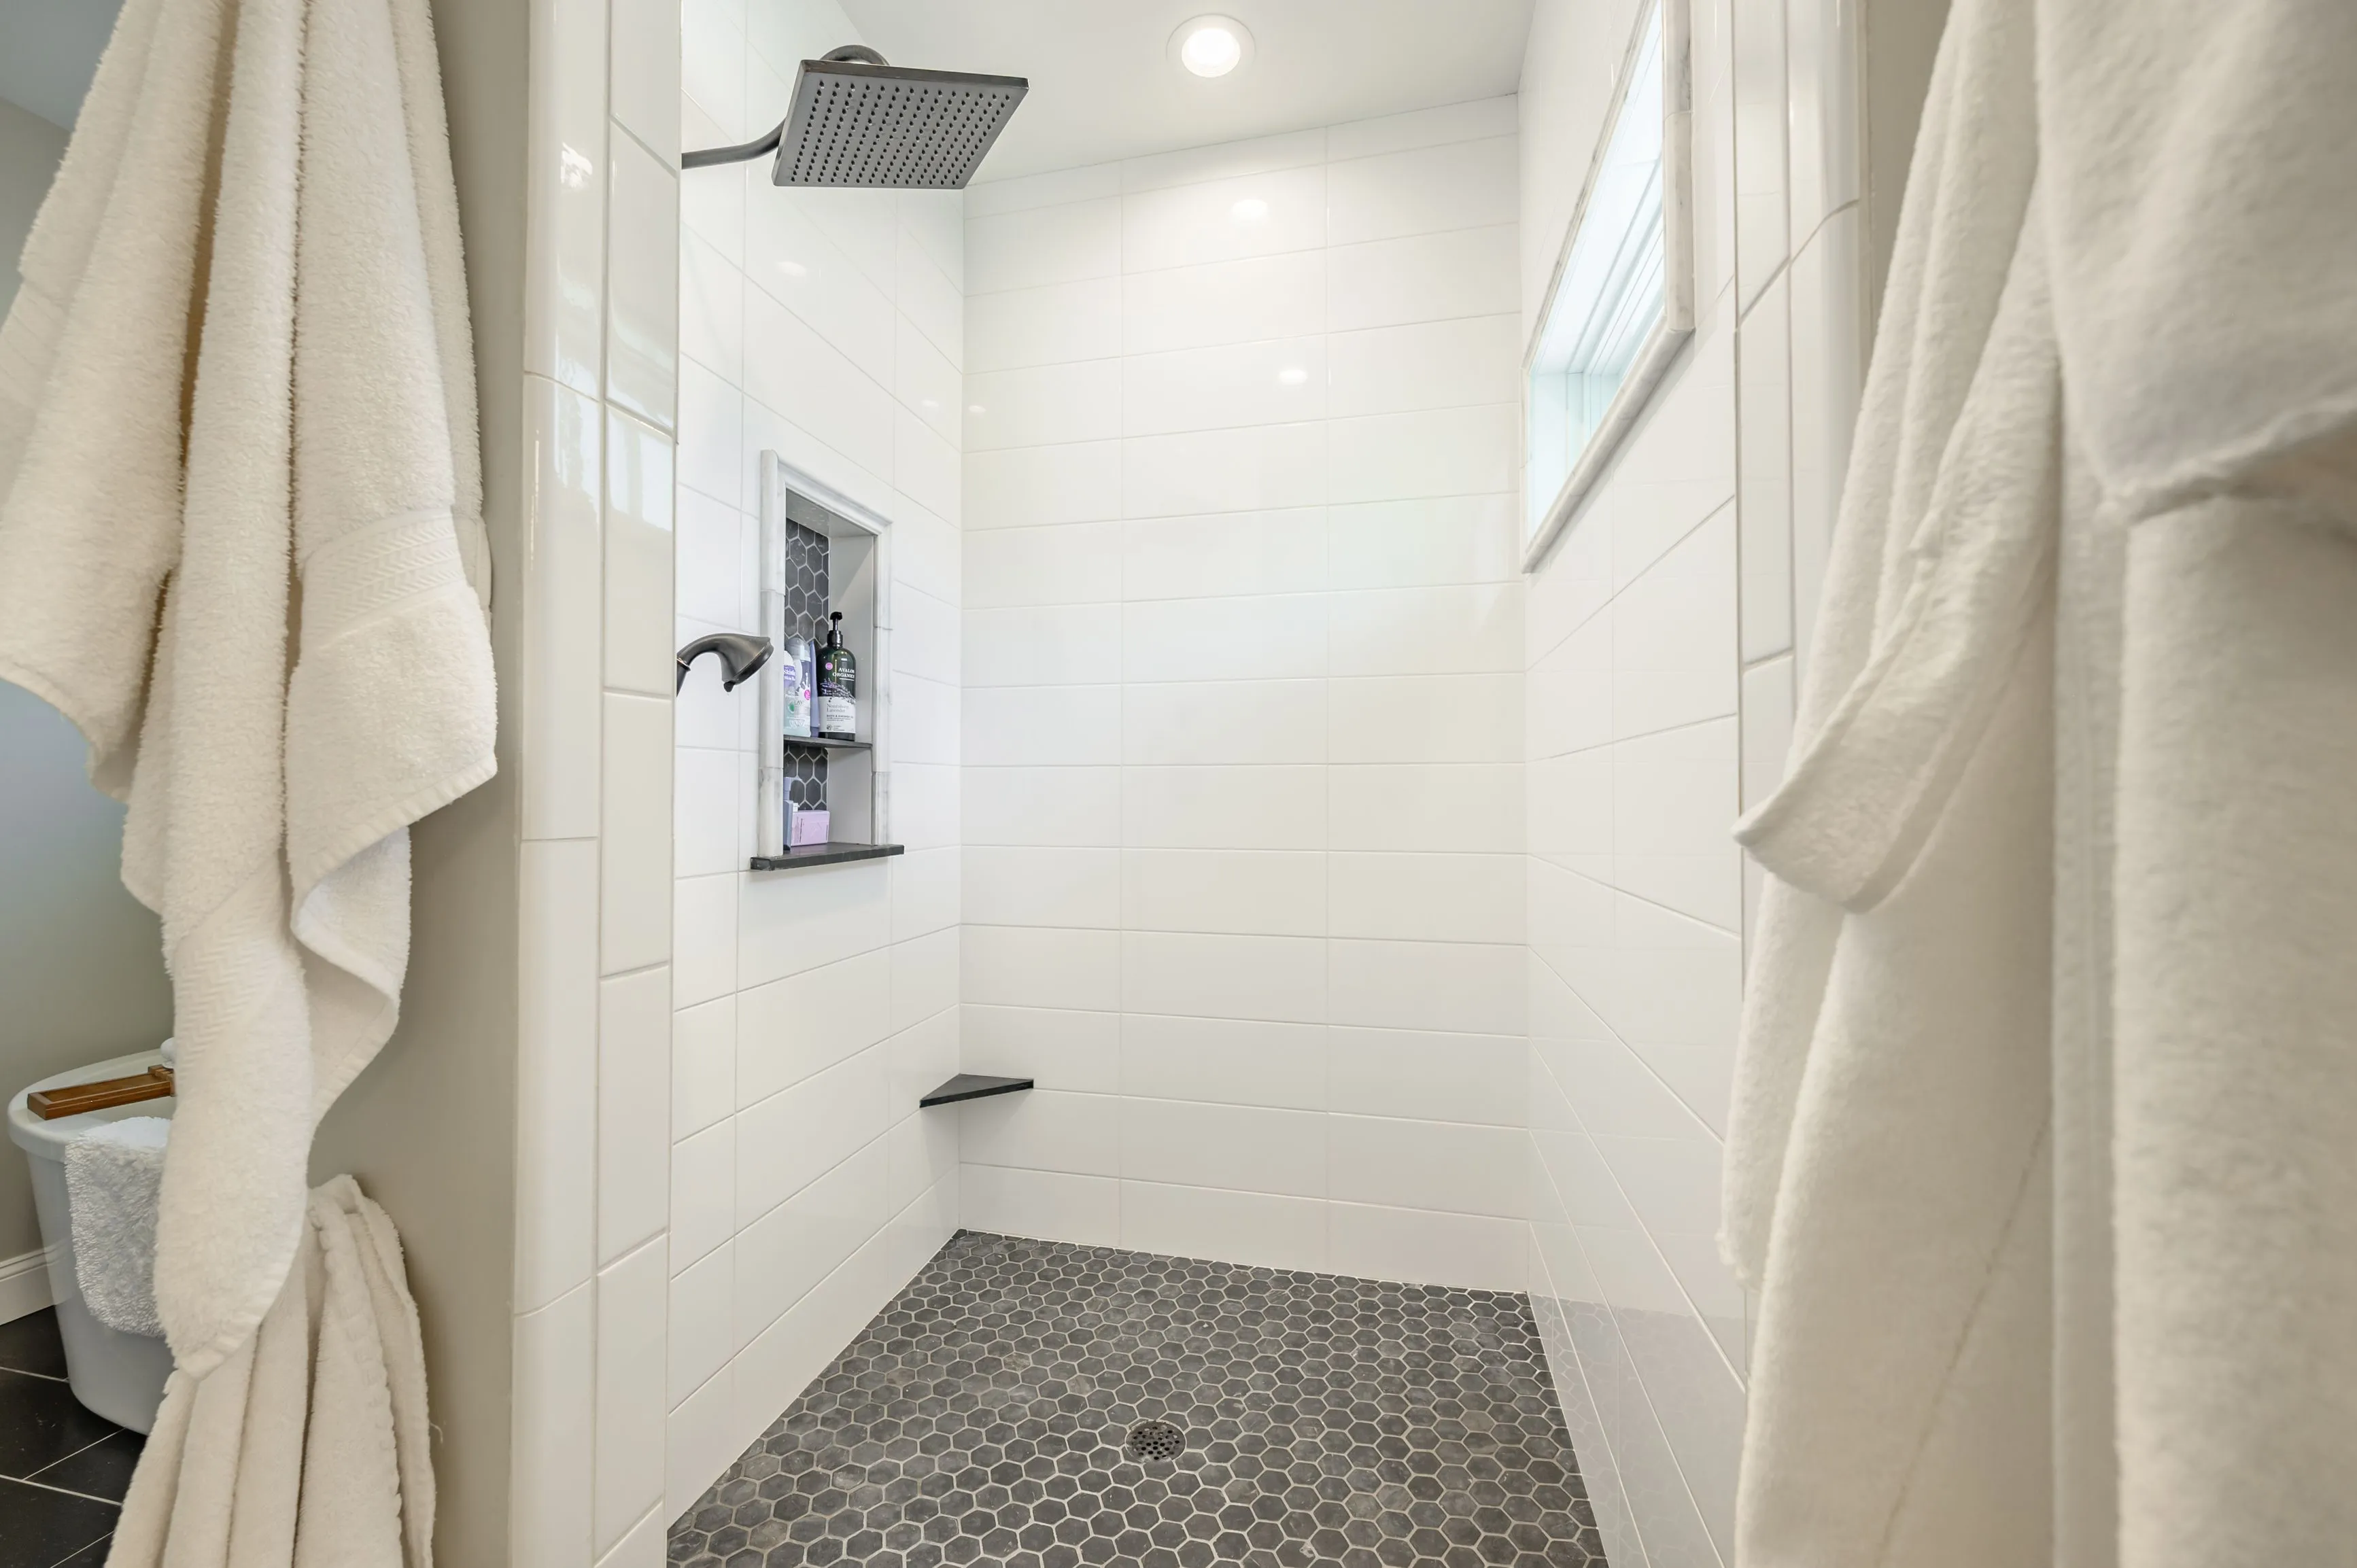 Modern bathroom with white curtains, a walk-in shower with dark tile flooring, and a wall-mounted shower head.